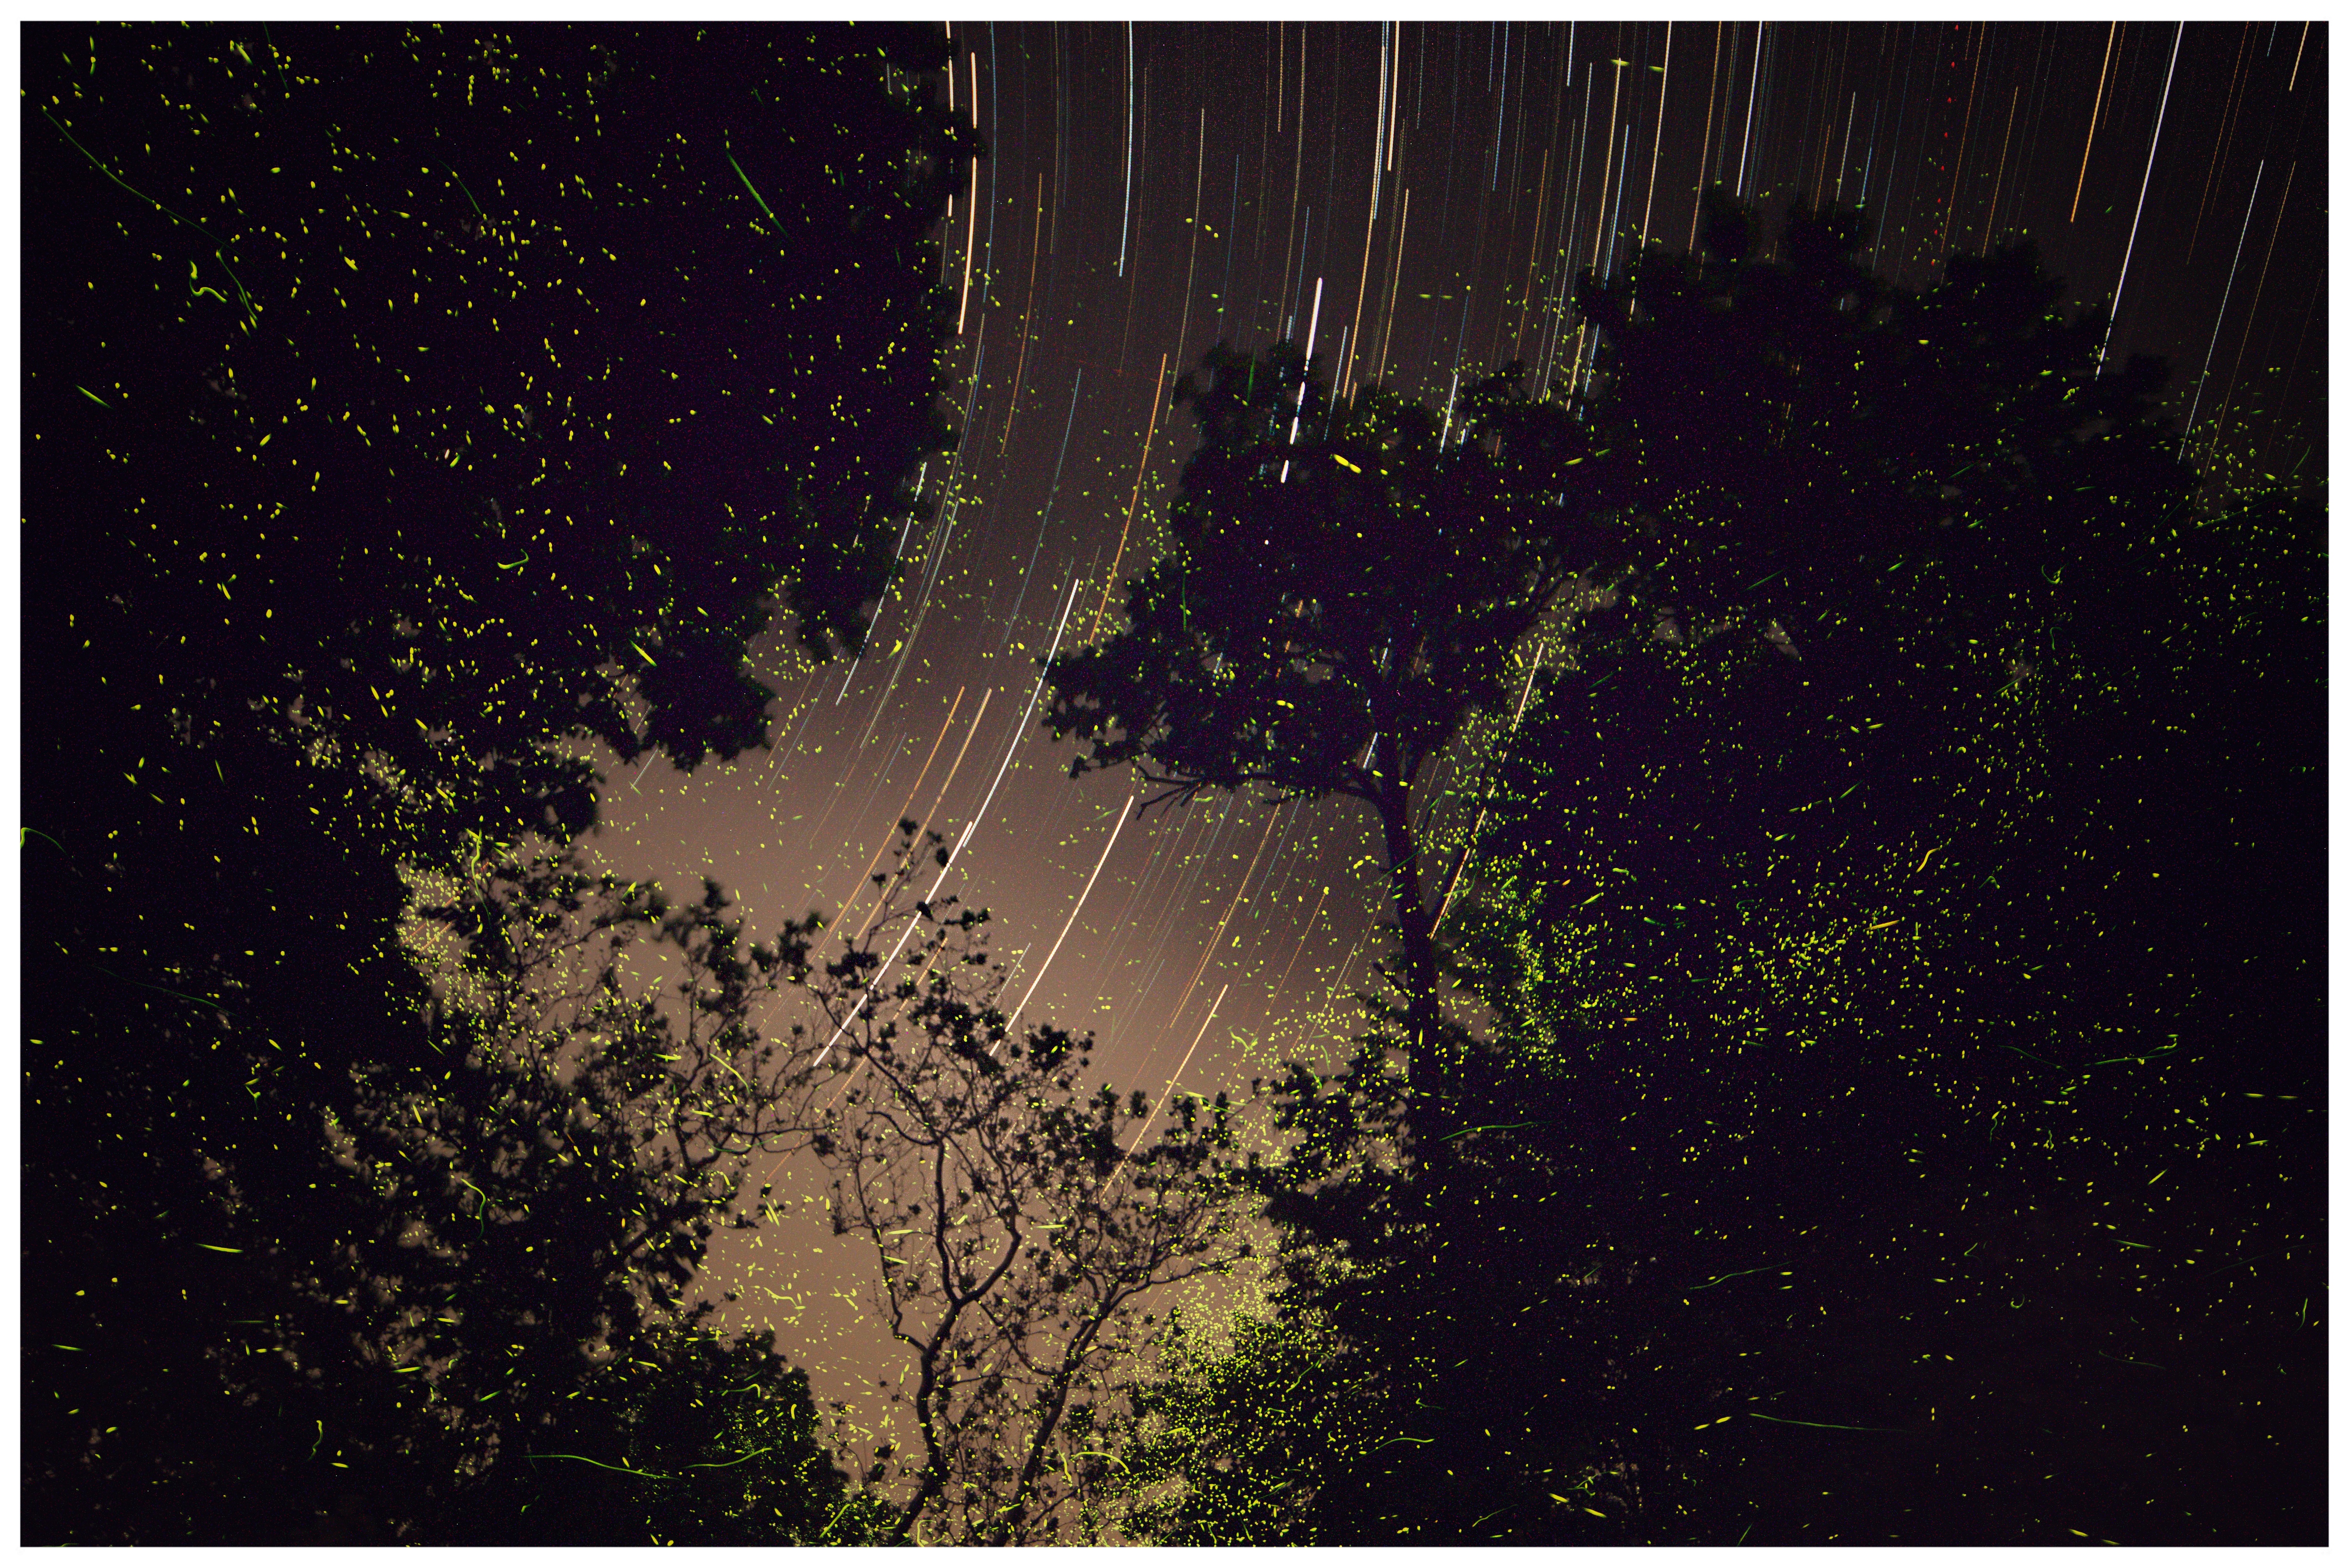 Astrophotography image with fireflies by Michael LaTour.